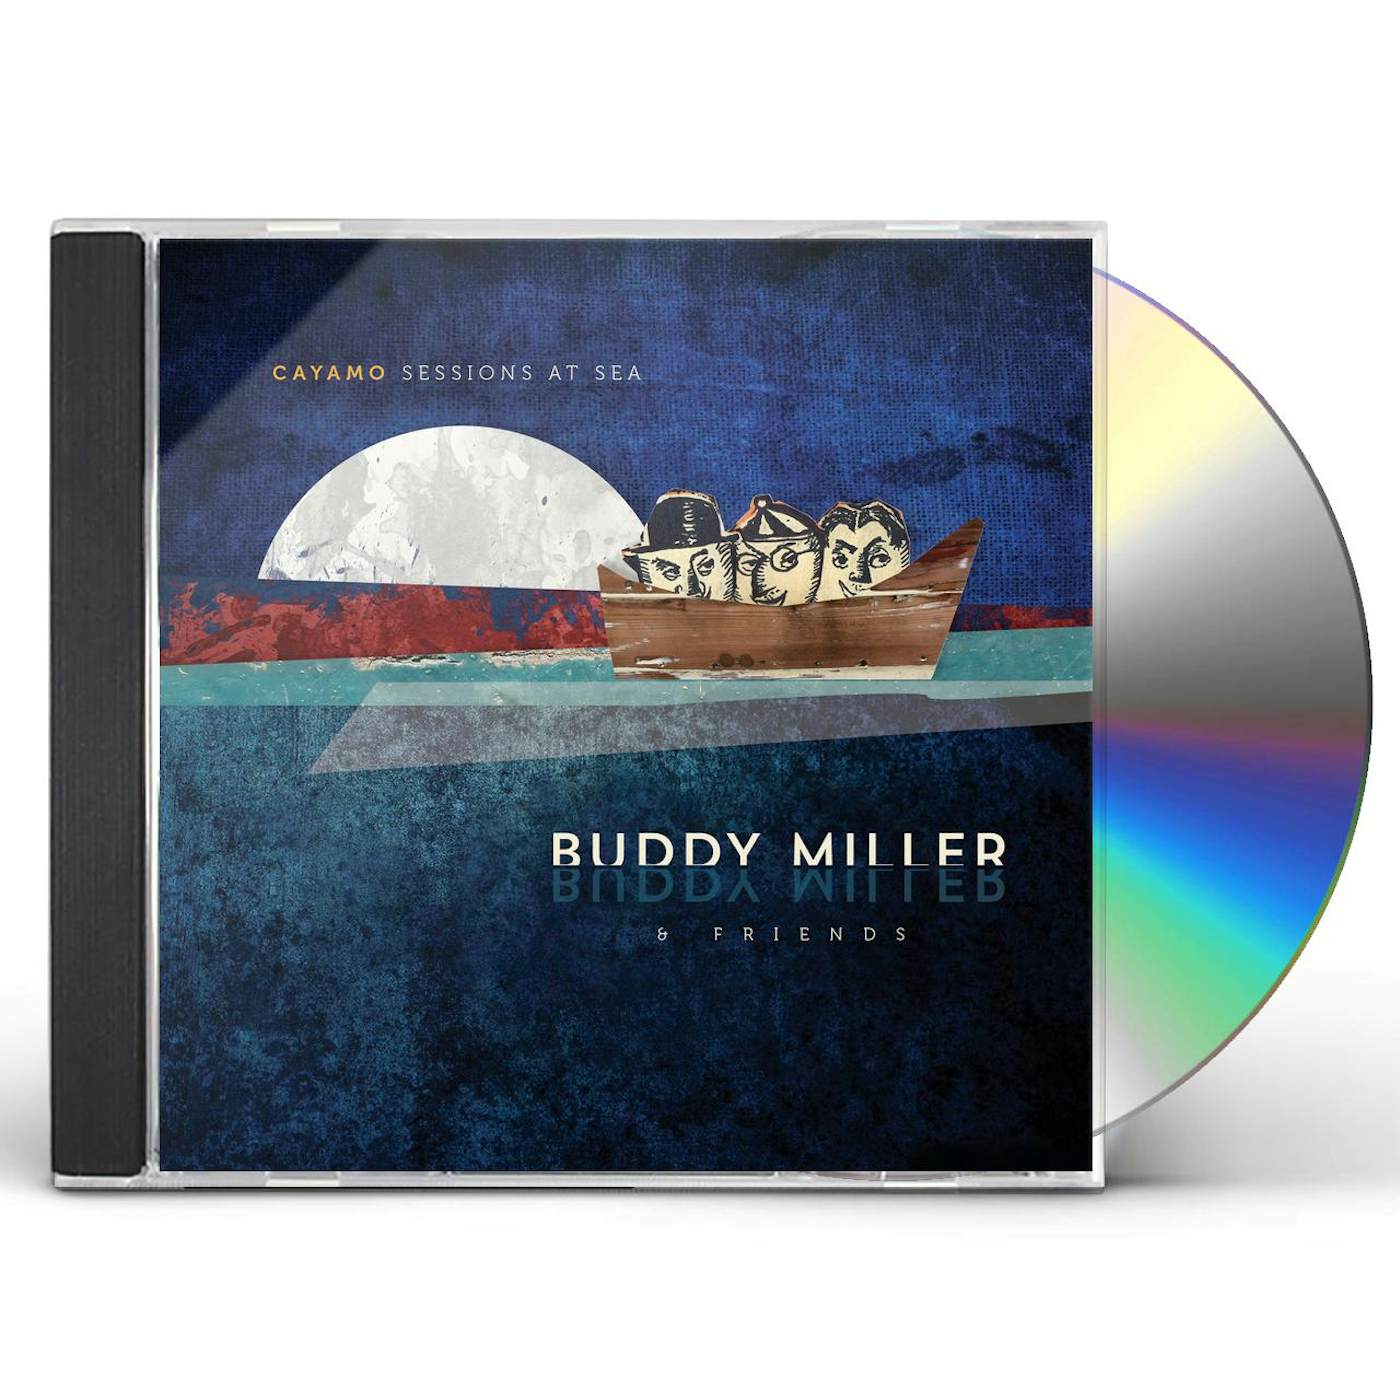 Buddy Miller CAYAMO SESSIONS AT SEA CD